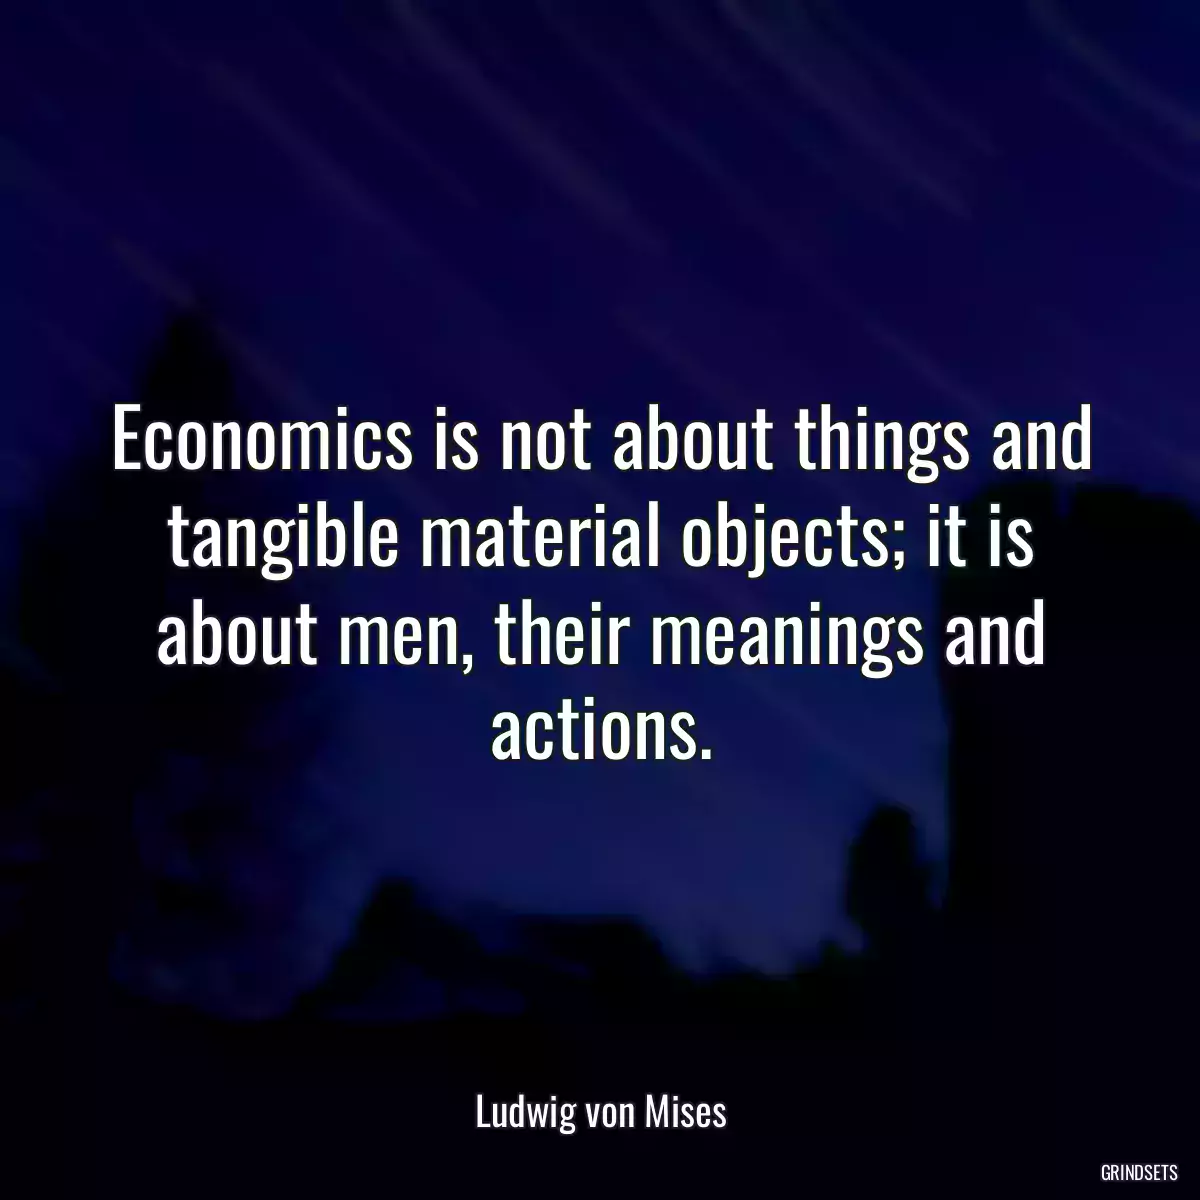 Economics is not about things and tangible material objects; it is about men, their meanings and actions.